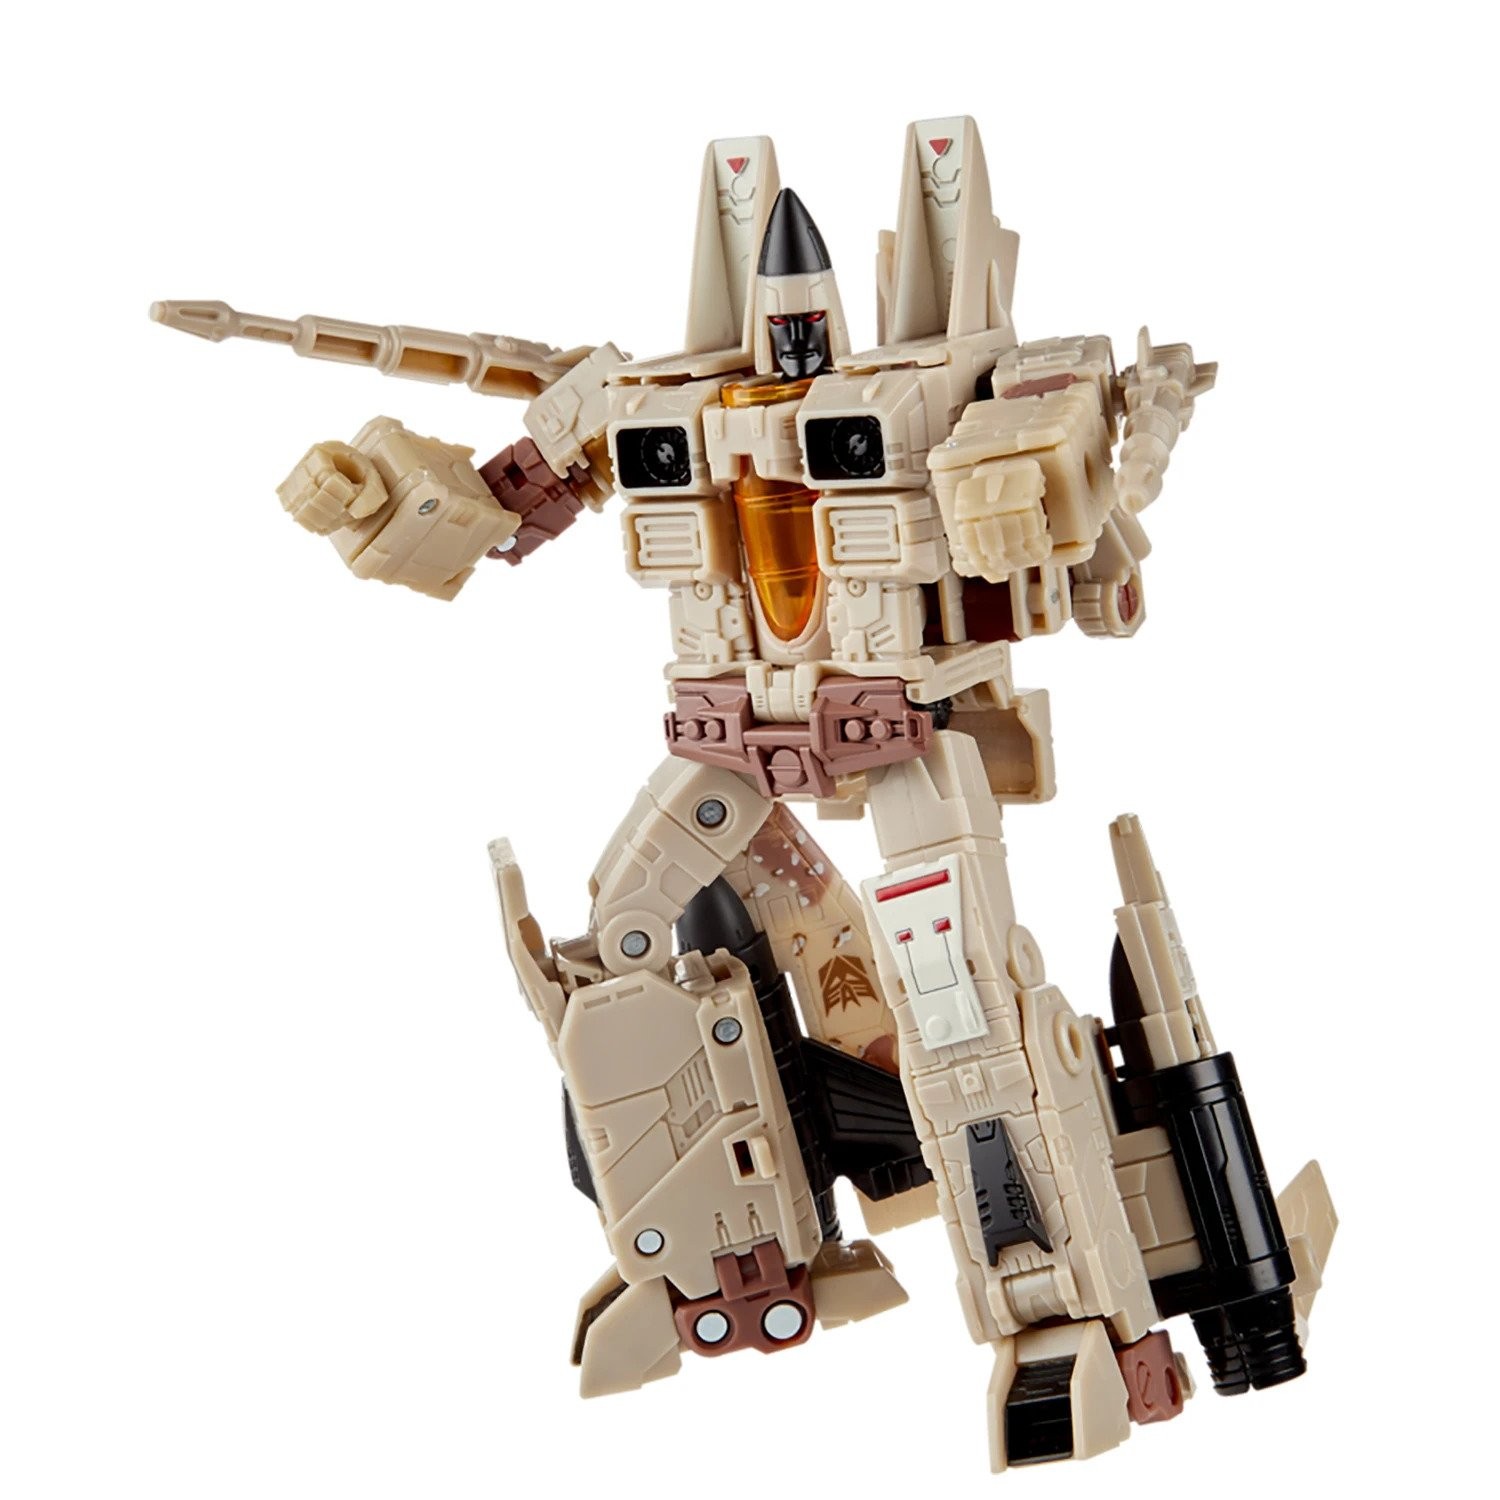 Transformers News: Transformers Earthrise Scorponok and Transformers Selects G2 Sandstorm Back on Hasbro Pulse